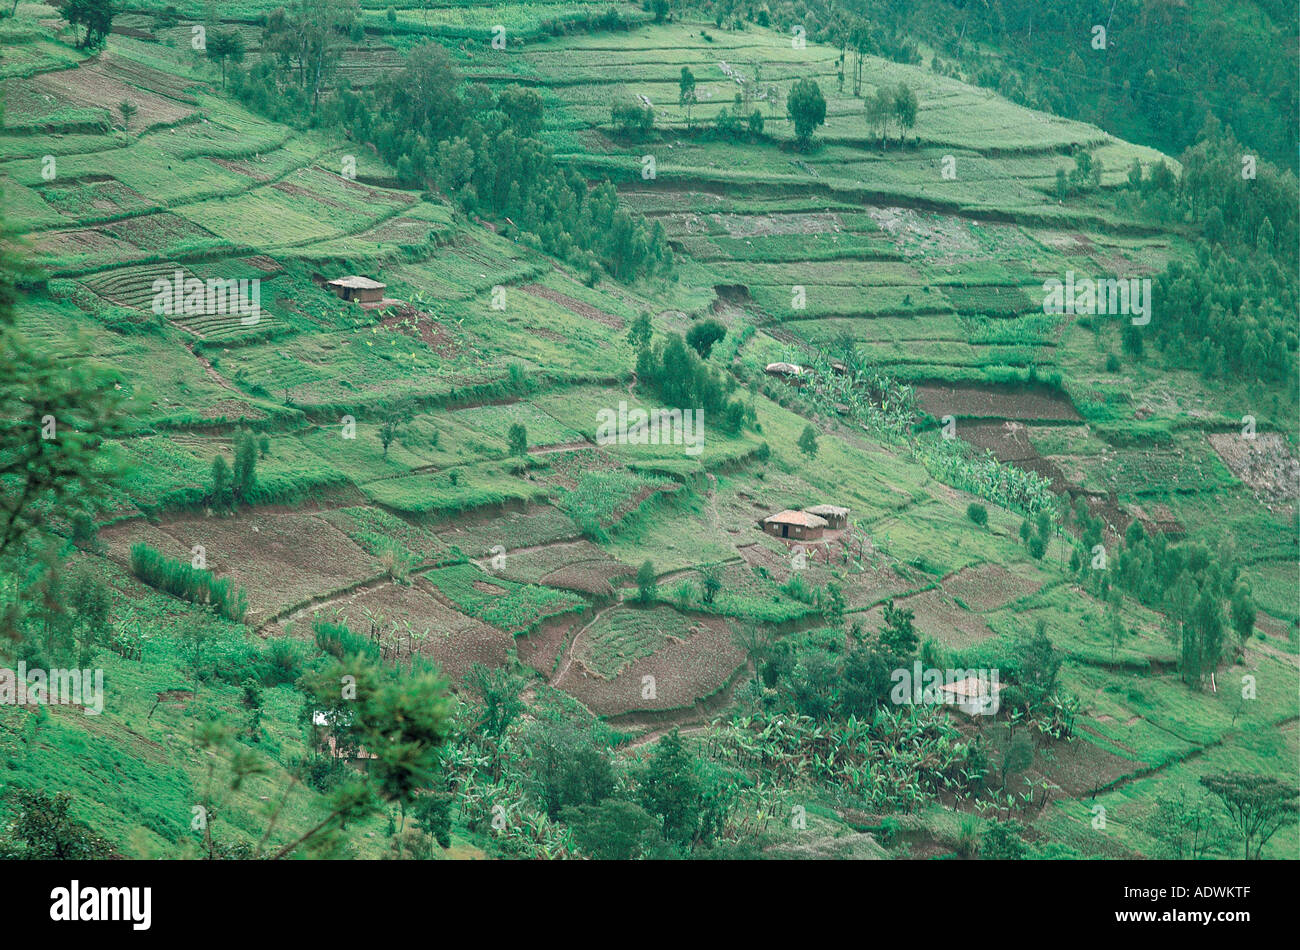 Homes and terraced farms cling to rugged hillsides in northern Rwanda central Africa Stock Photo